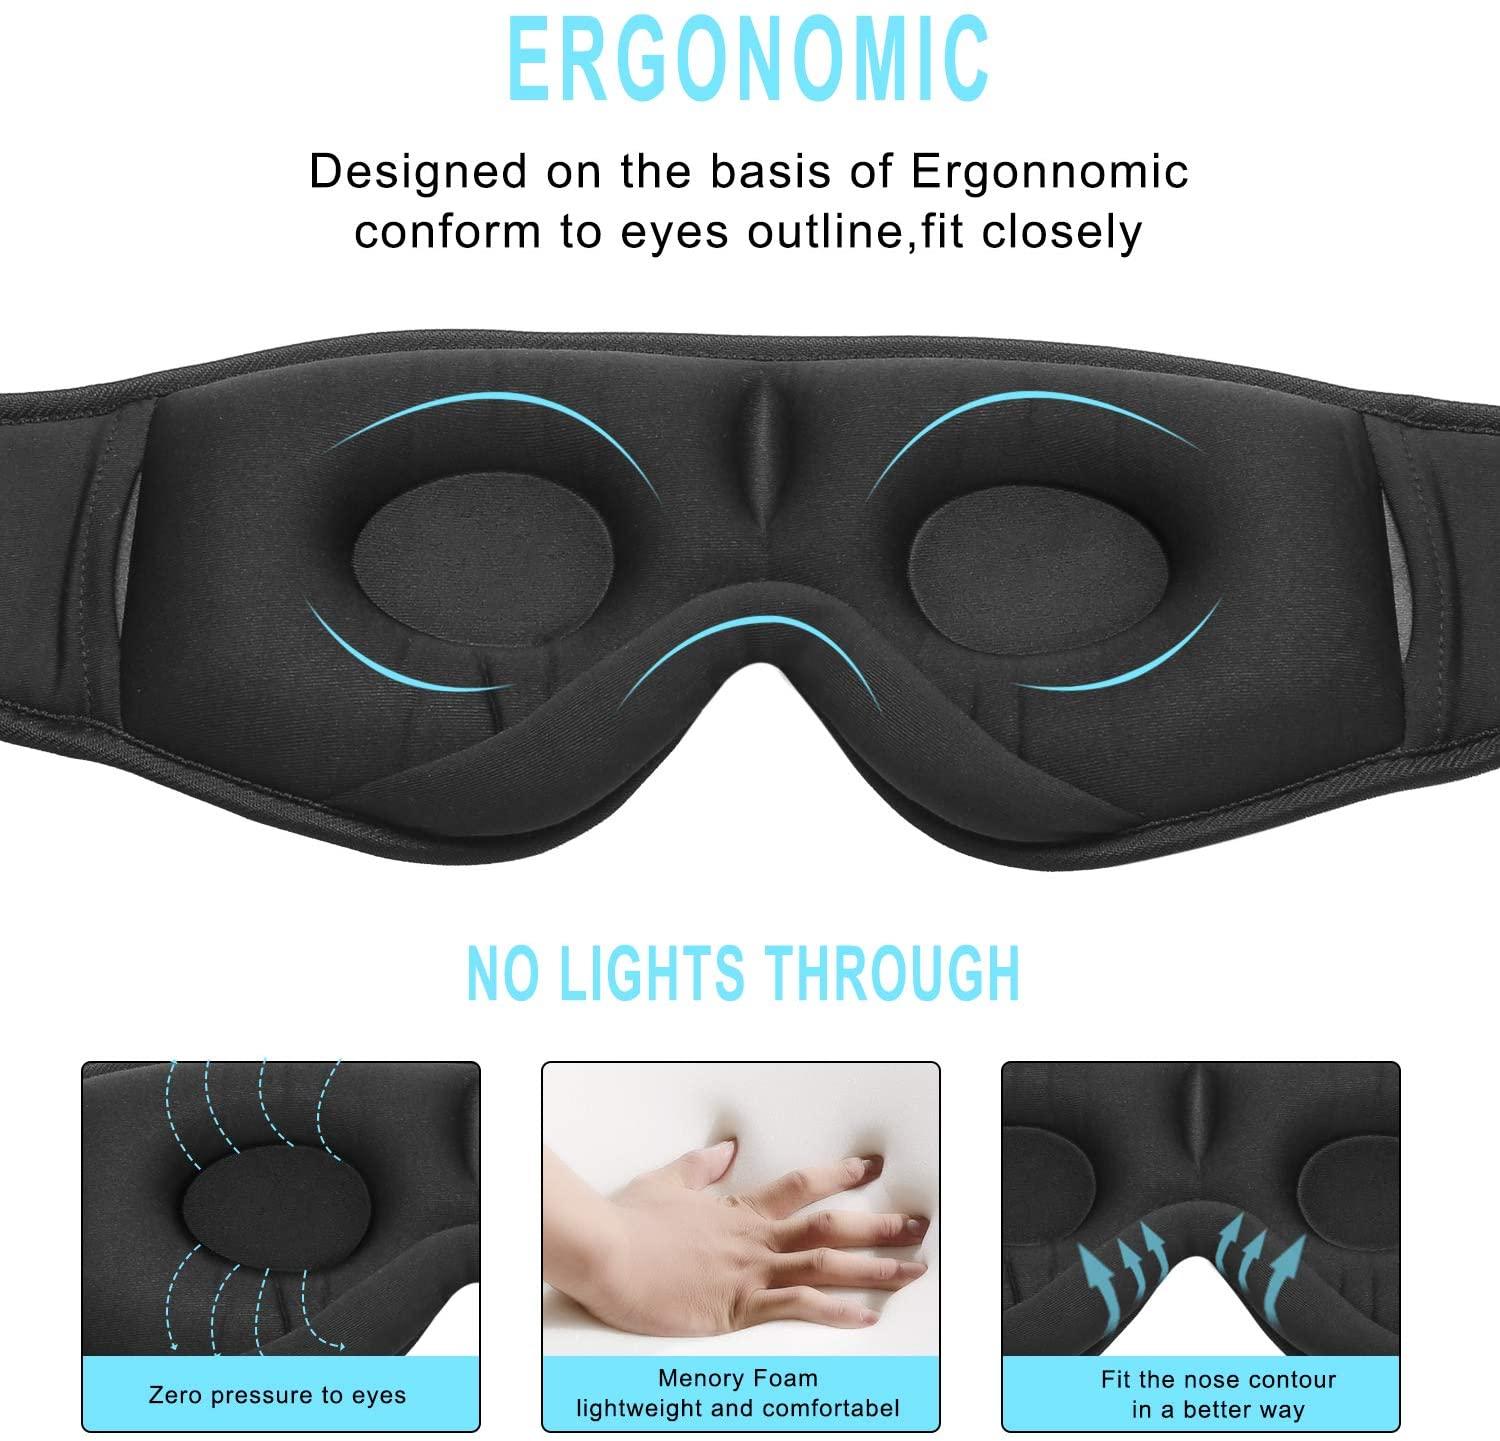 Sleep Headphones Bluetooth 5.0 Wireless 3D Eye Mask HeadSet With Microphone for Side Breathable Sleepers Travel Call And Music